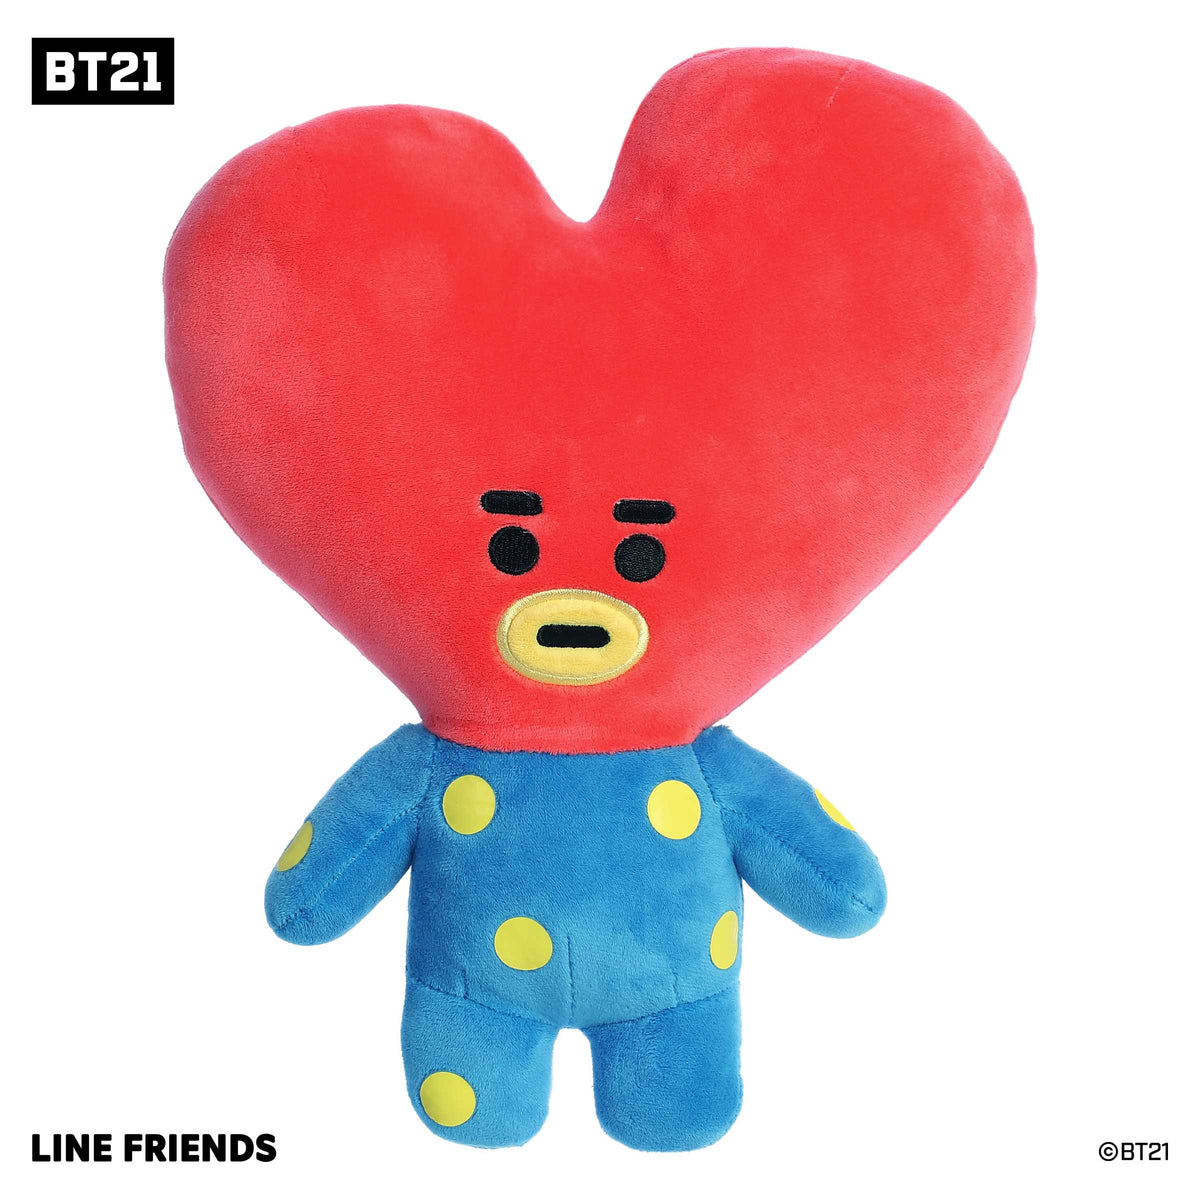 TATA Plush from BT21 in a heart-shape, symbolizing the crown prince from Planet BT with a confident expression.